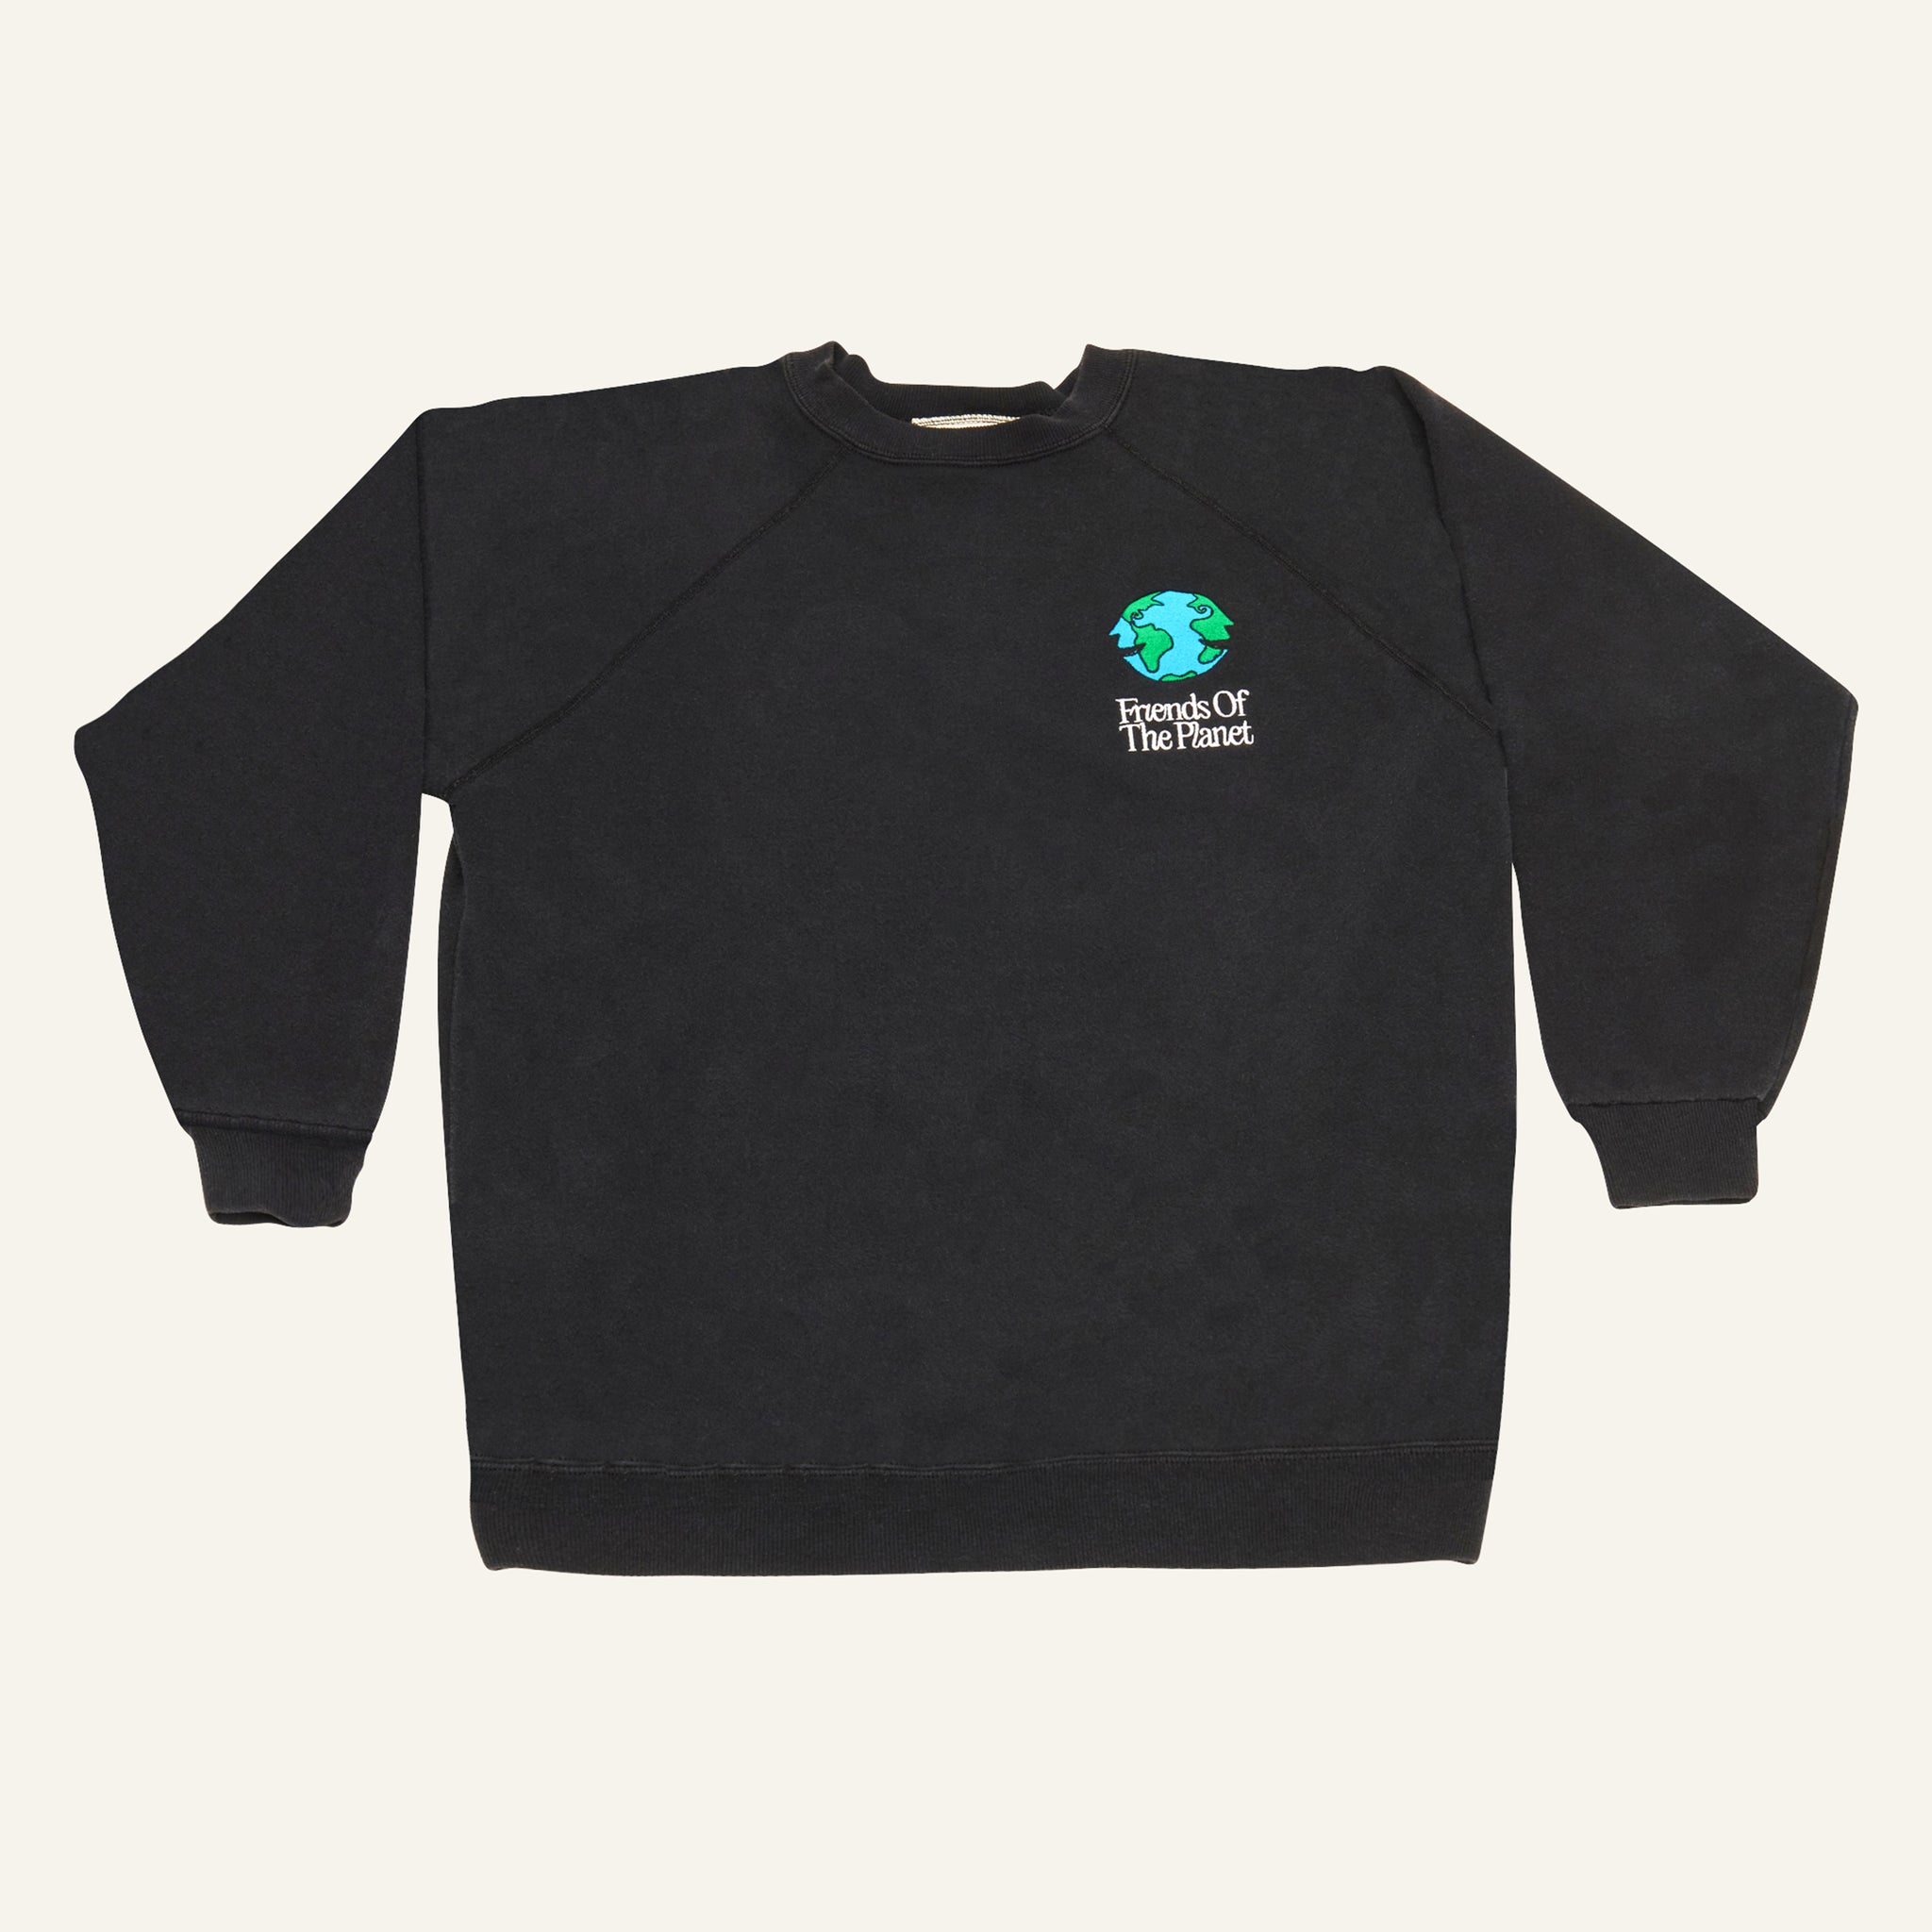 Upcycled Crewneck in Black ☯ Size L